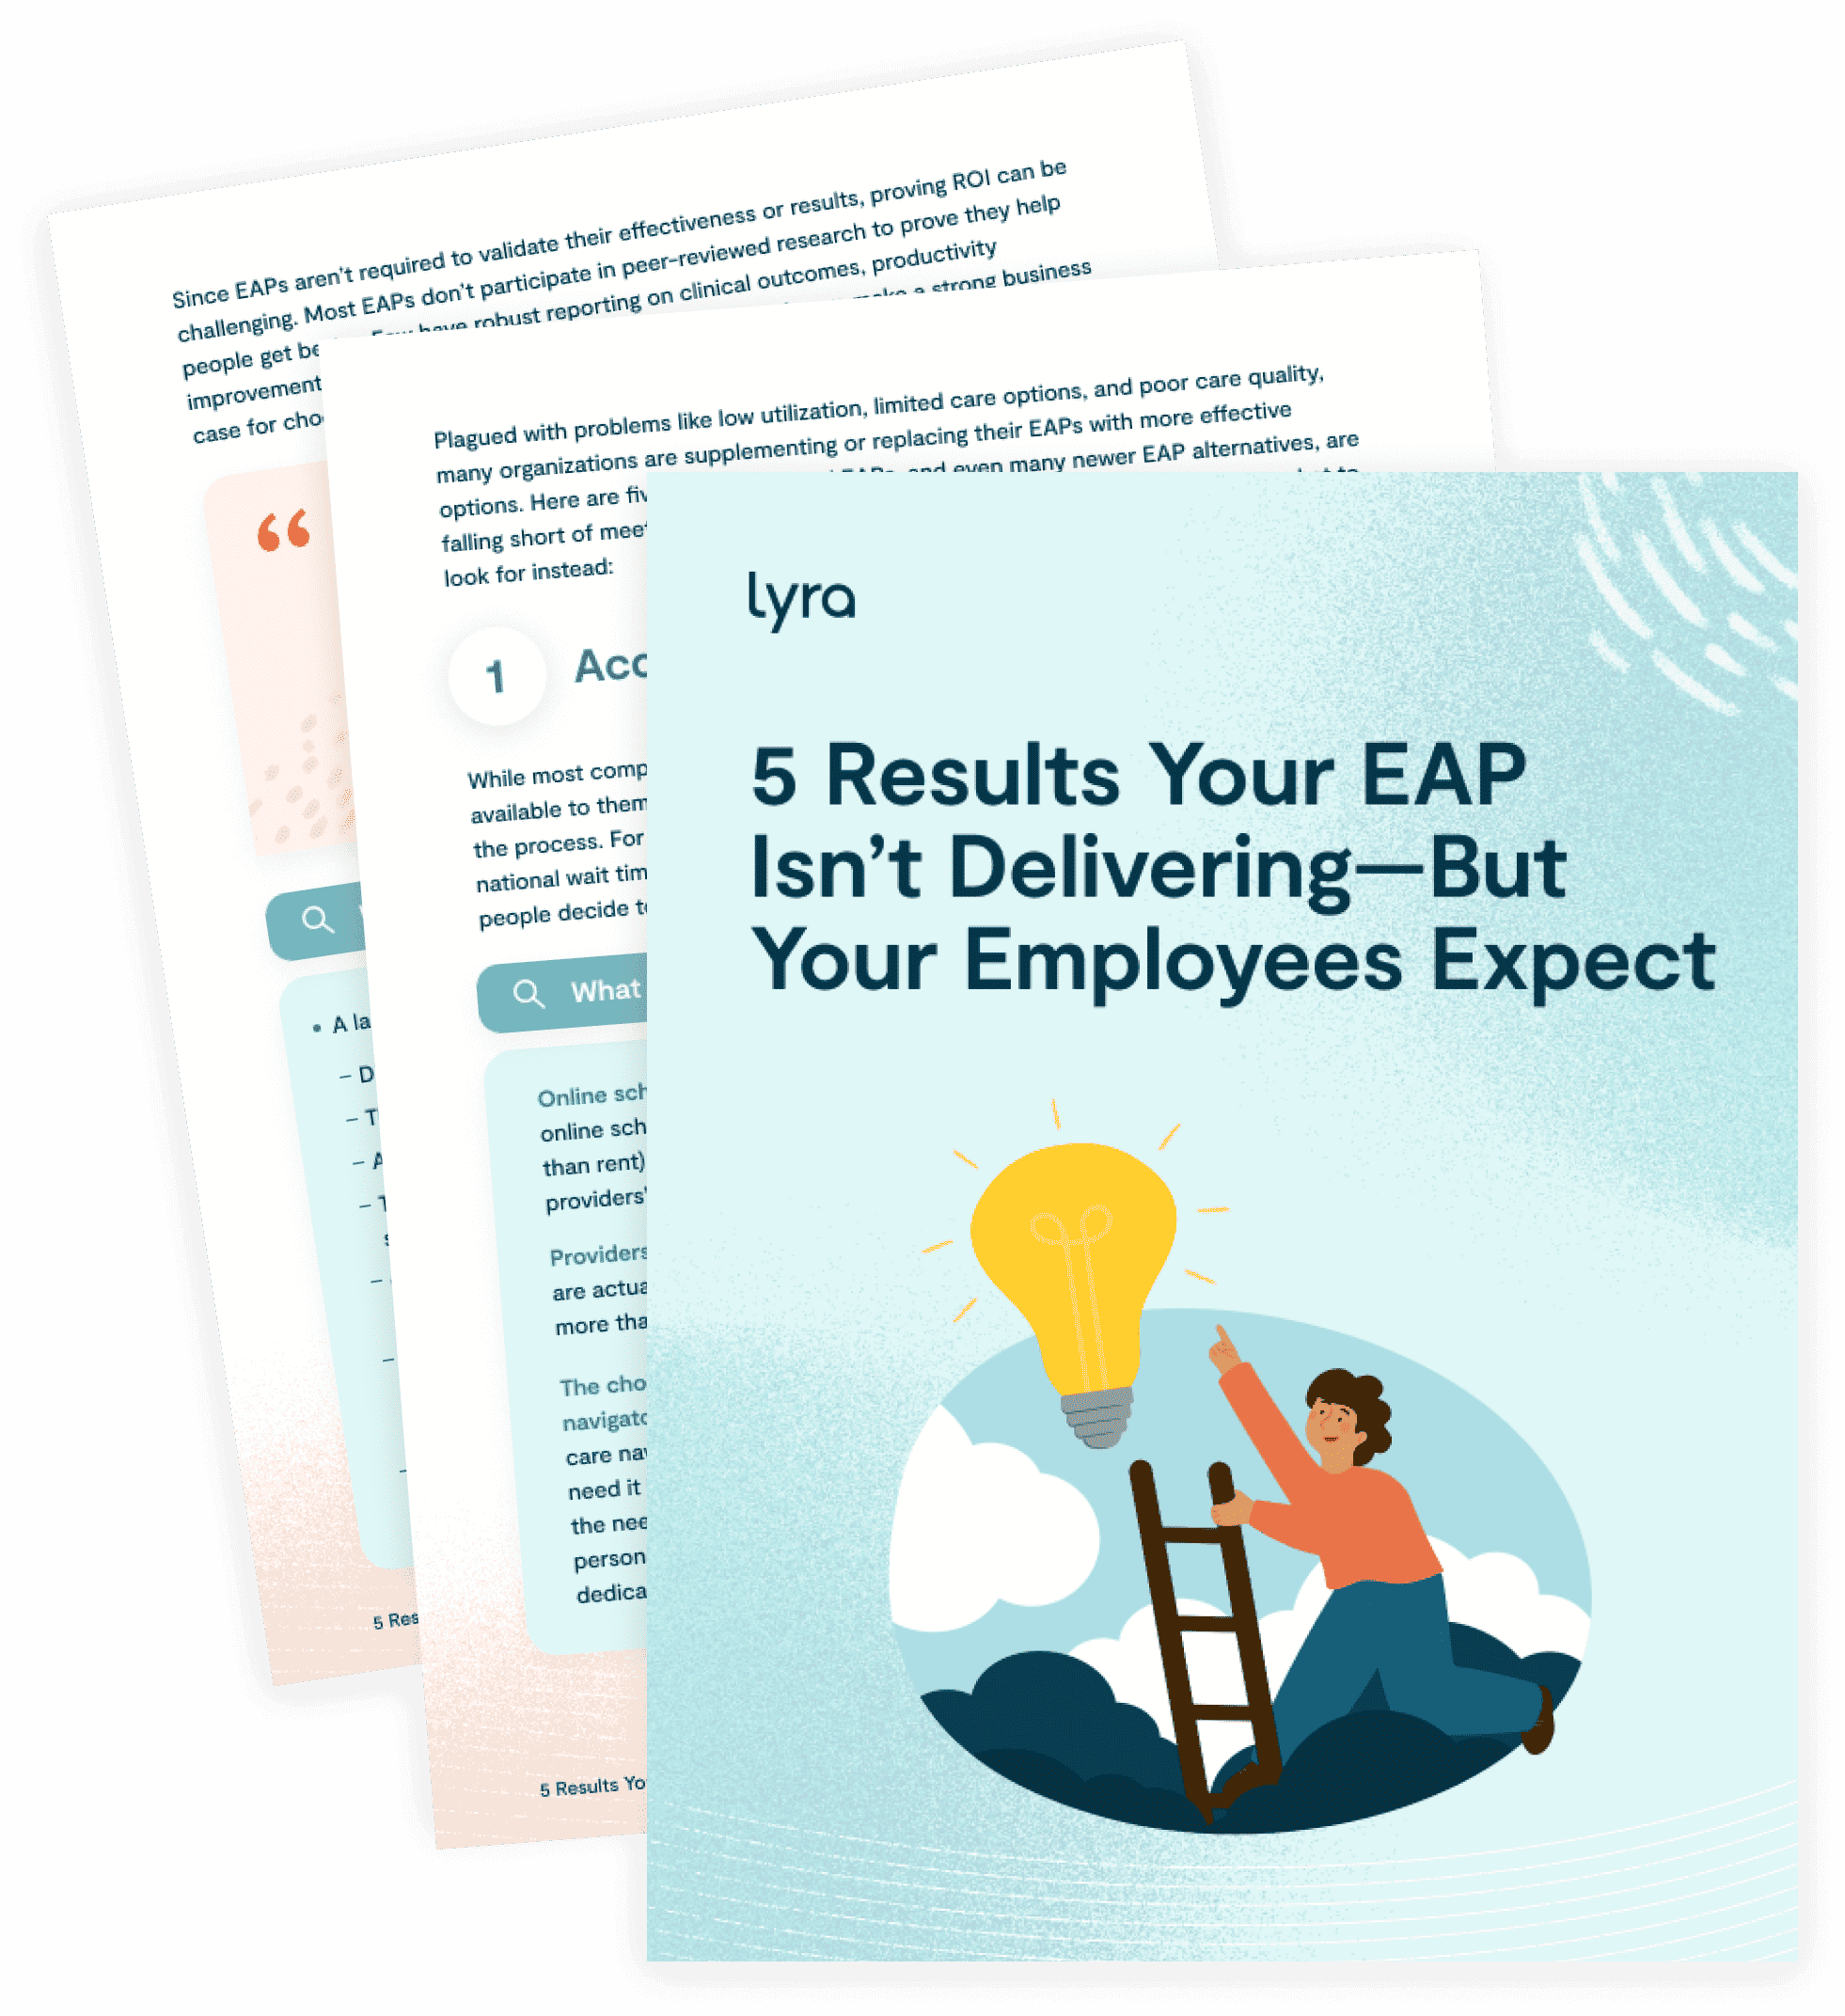 5 Results Your EAP Isn’t Delivering—But Your Employees Expect